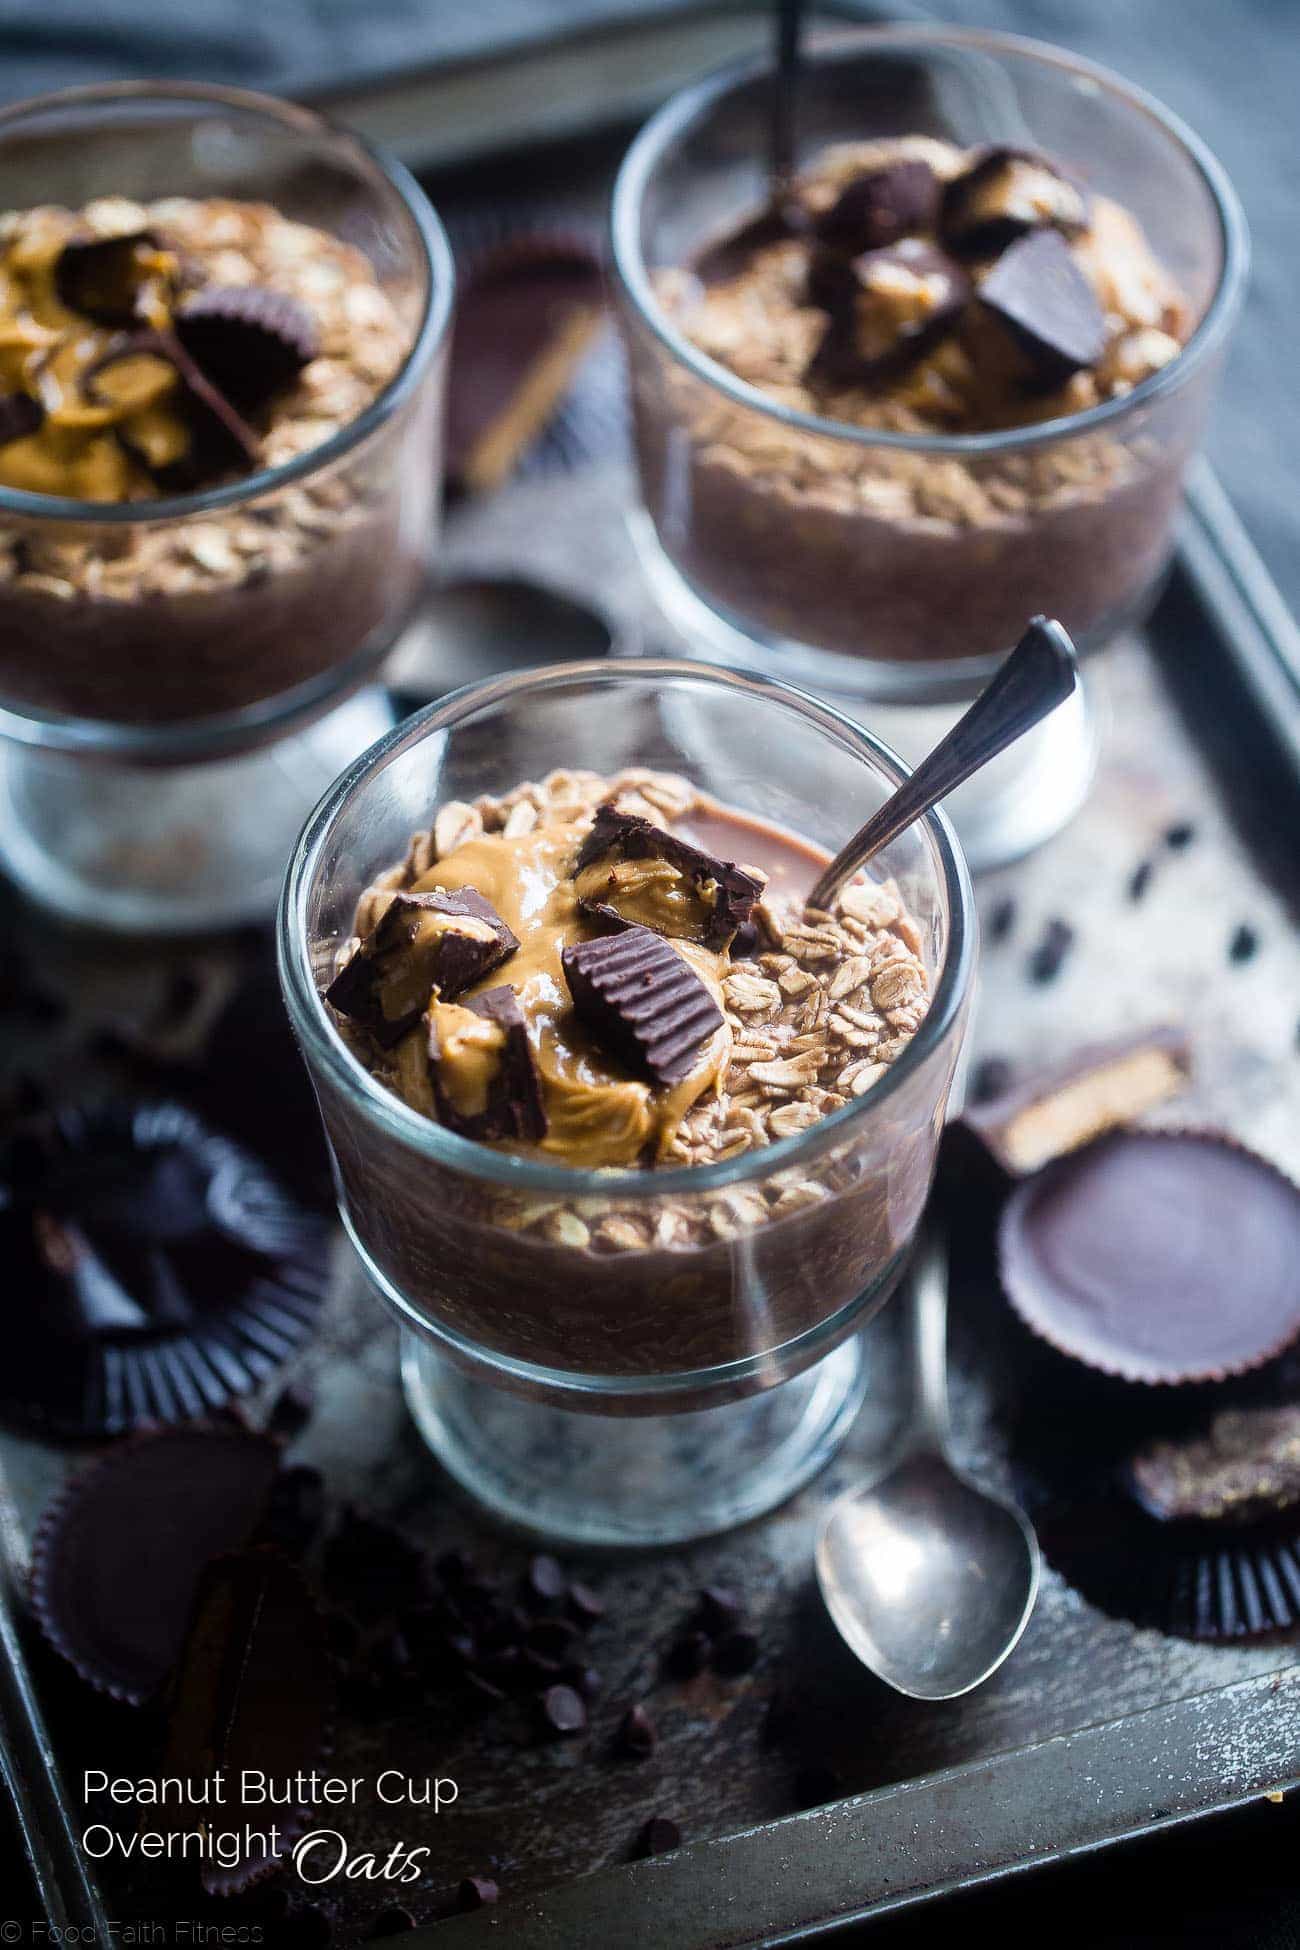 Chocolate Peanut Butter Overnight Oats With Yogurt - These 6-ingredient overnight oats are topped with homemade peanut butter cups! They're an easy, healthy, gluten free and protein-packed make-ahead breakfast! | Foodfaithfitness.com | @FoodFaithFit